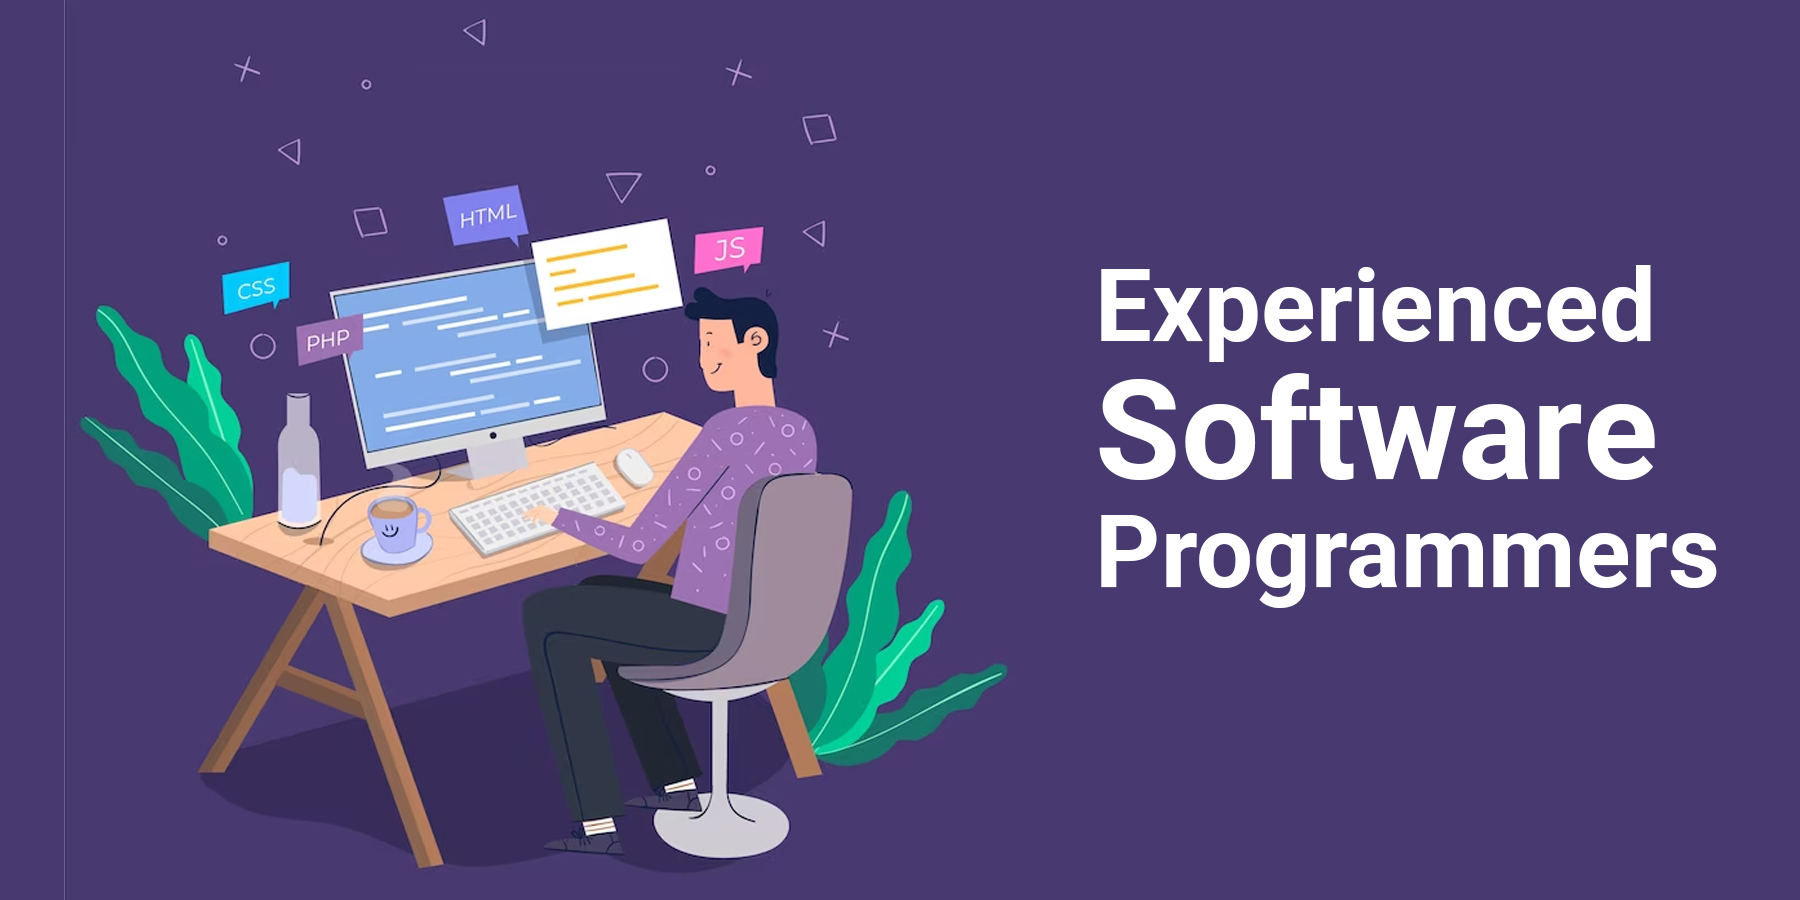 Do You Need to Hire Experienced Software Programmers? Here’s Why!